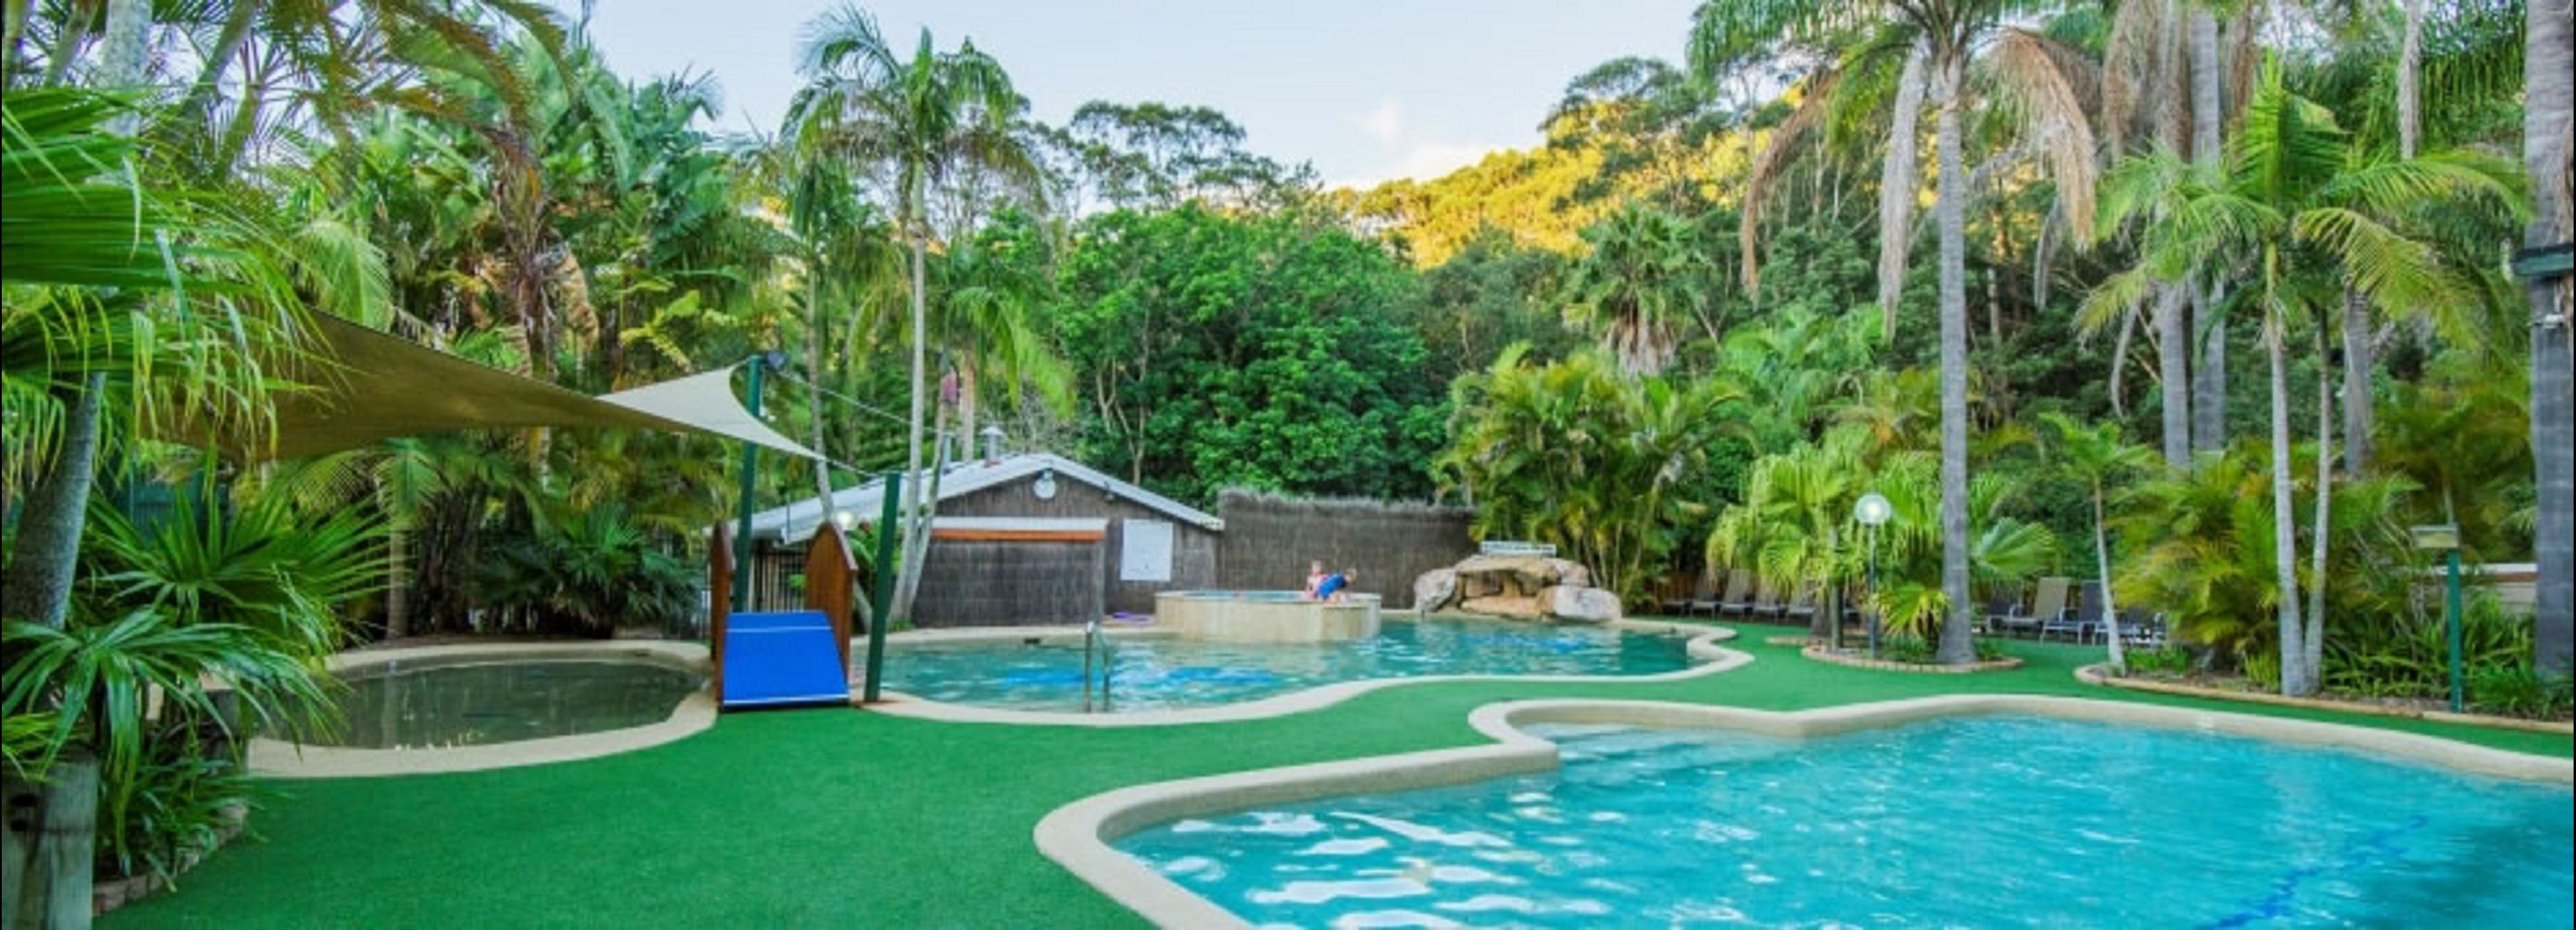 The Palms at Avoca - Accommodation Port Macquarie